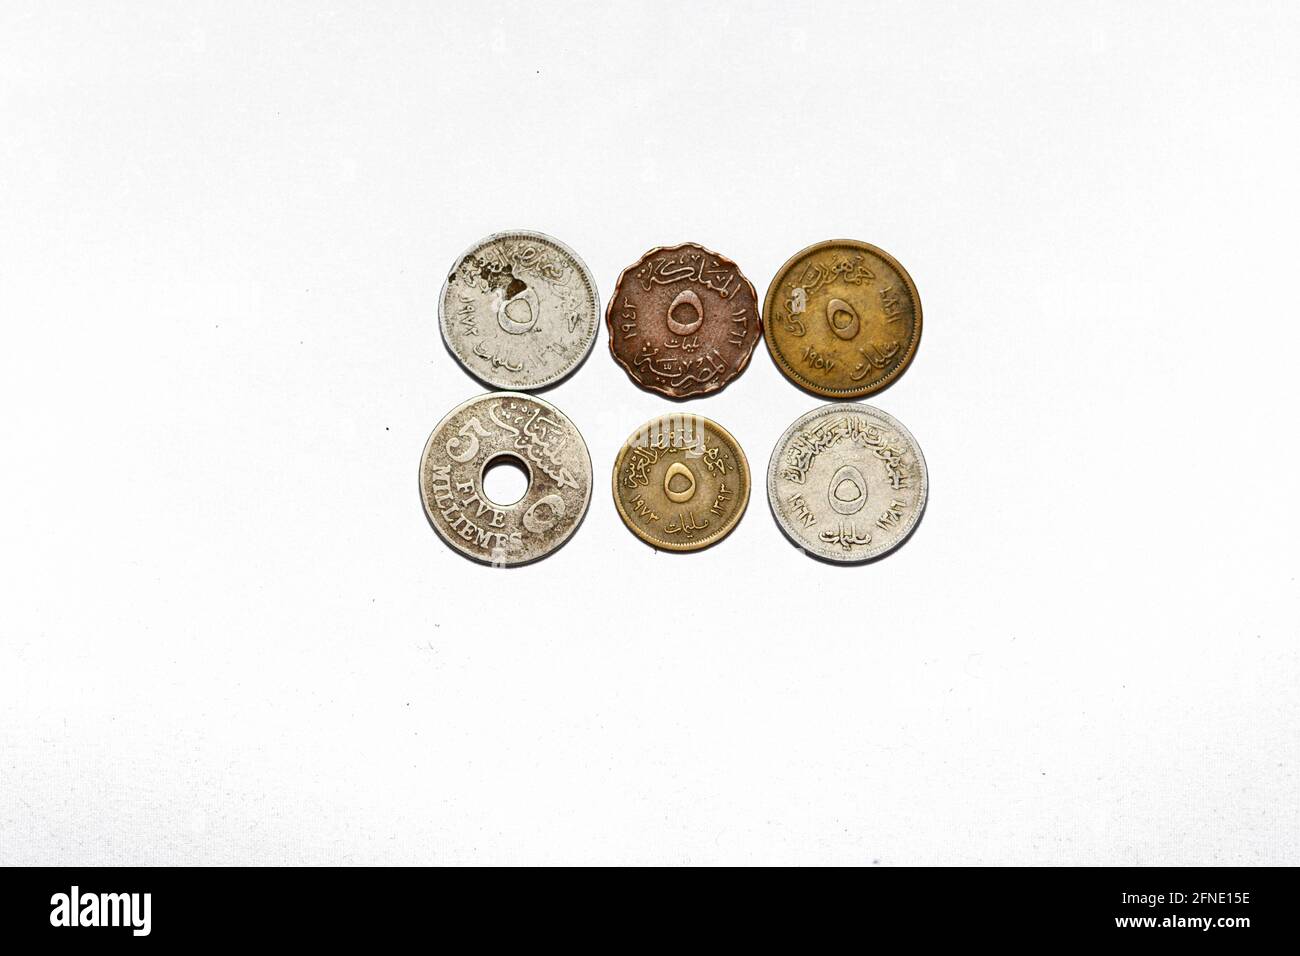 collection of old Egyptian money coins of 5 Milliemes background, different shapes of old Egyptian five Milliemes coin from different years isolated Stock Photo